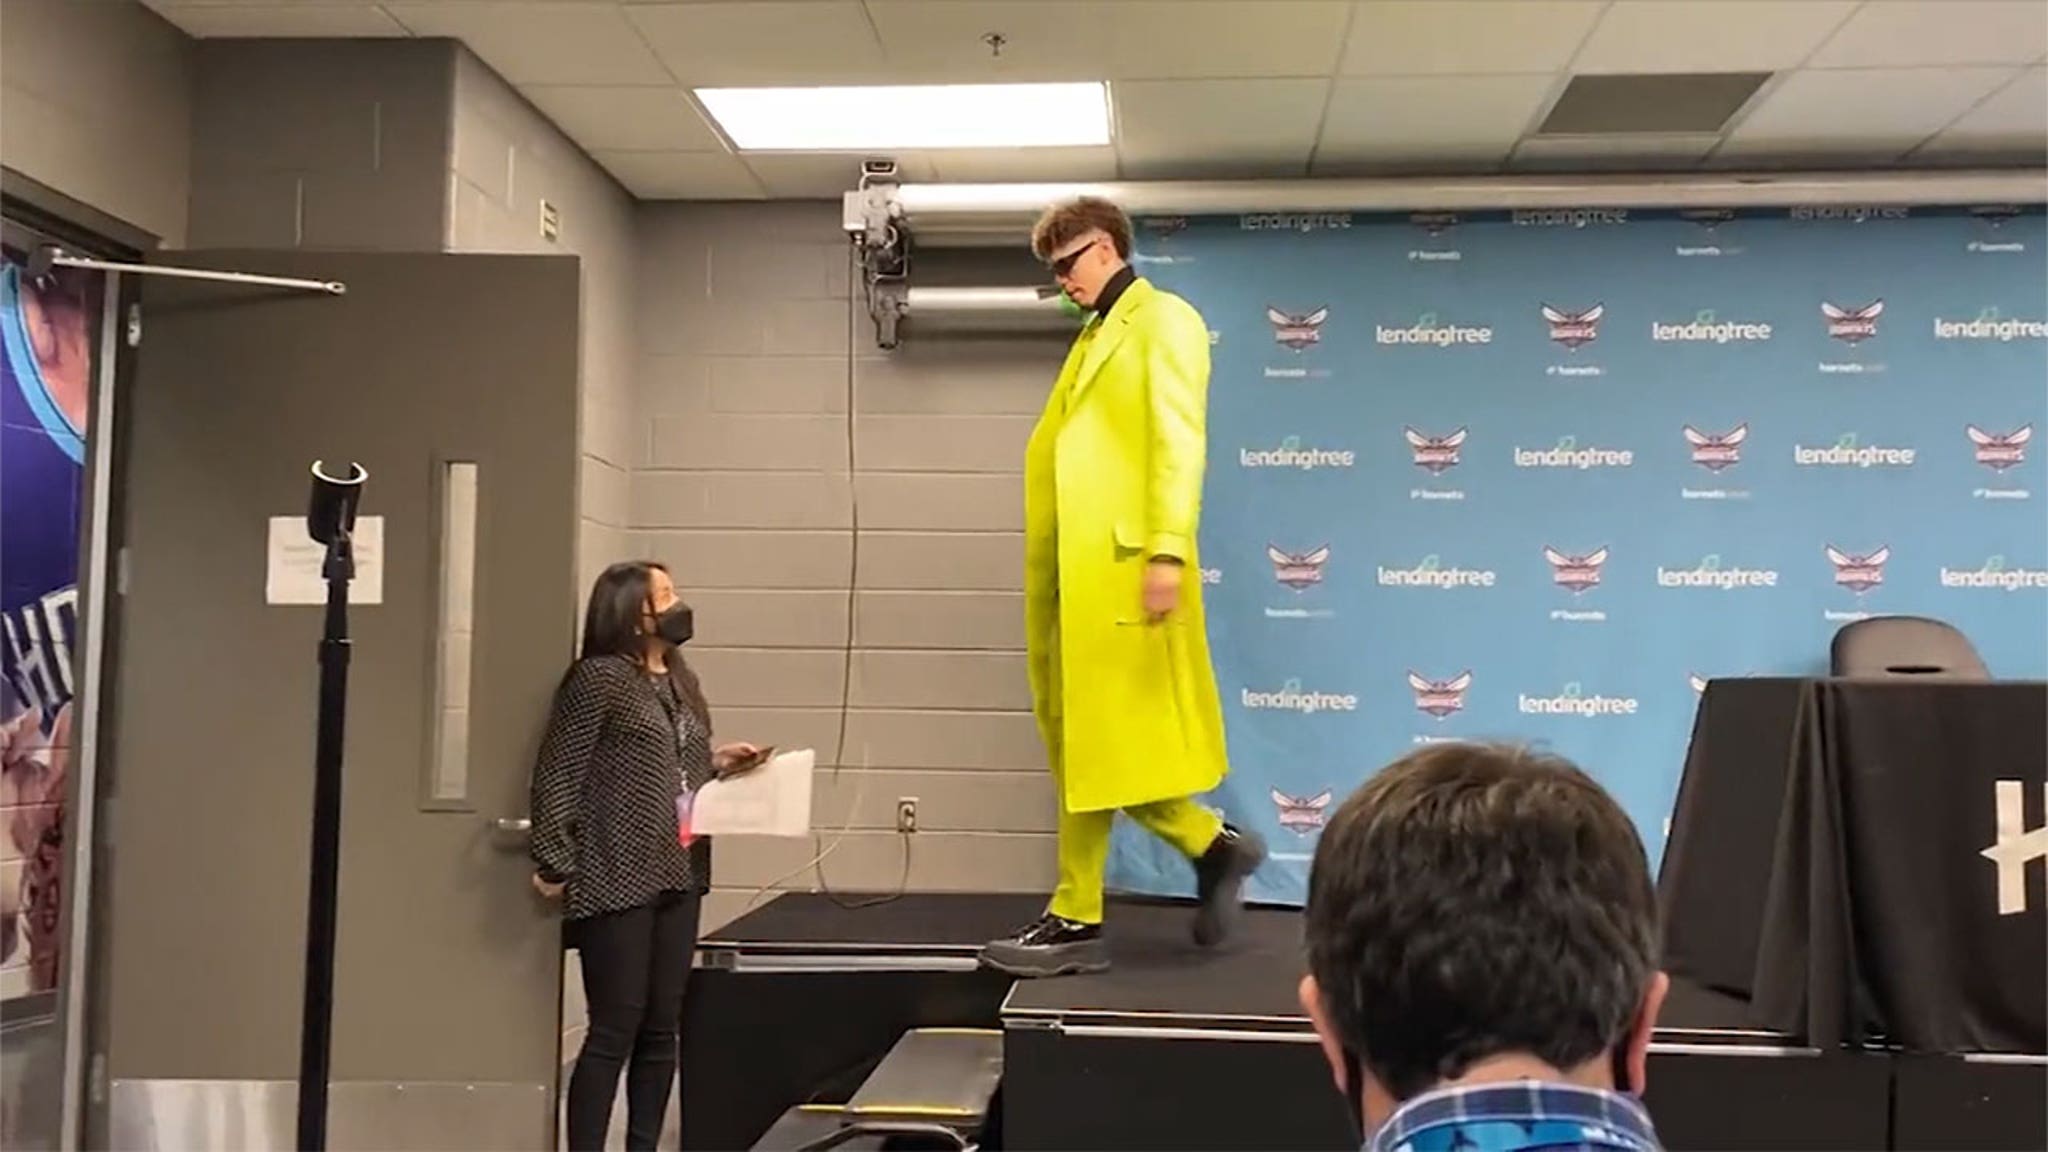 LaMelo Ball's neon outfit after Charlotte's win against Pacers